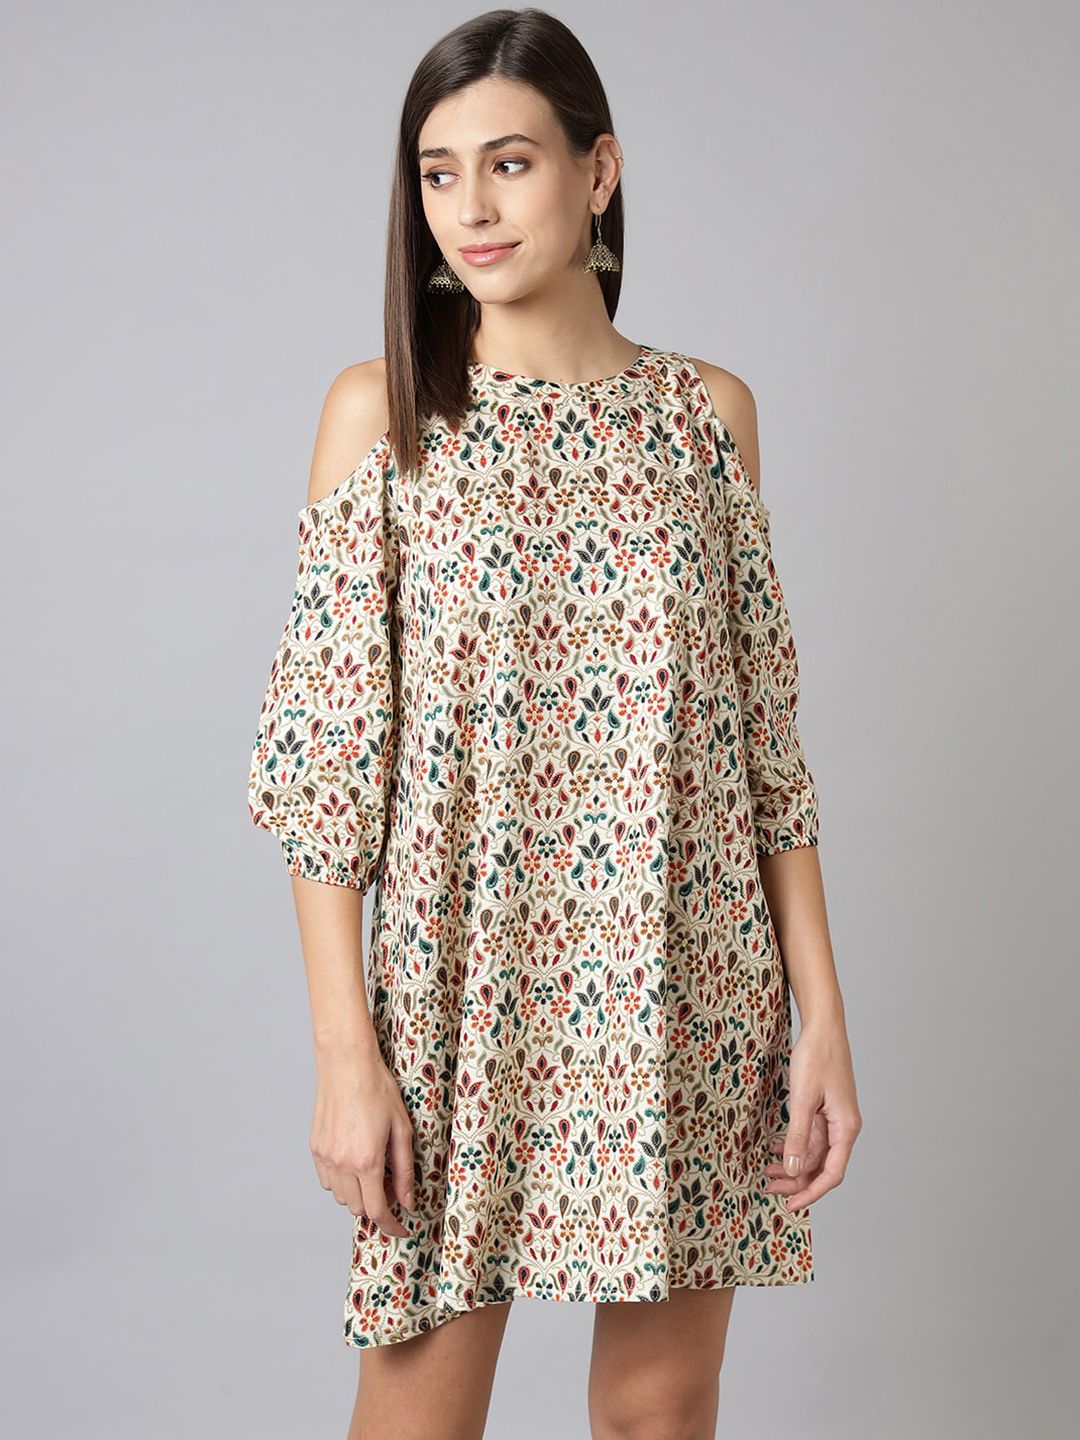 TANKHI White Floral A-Line Dress Price in India